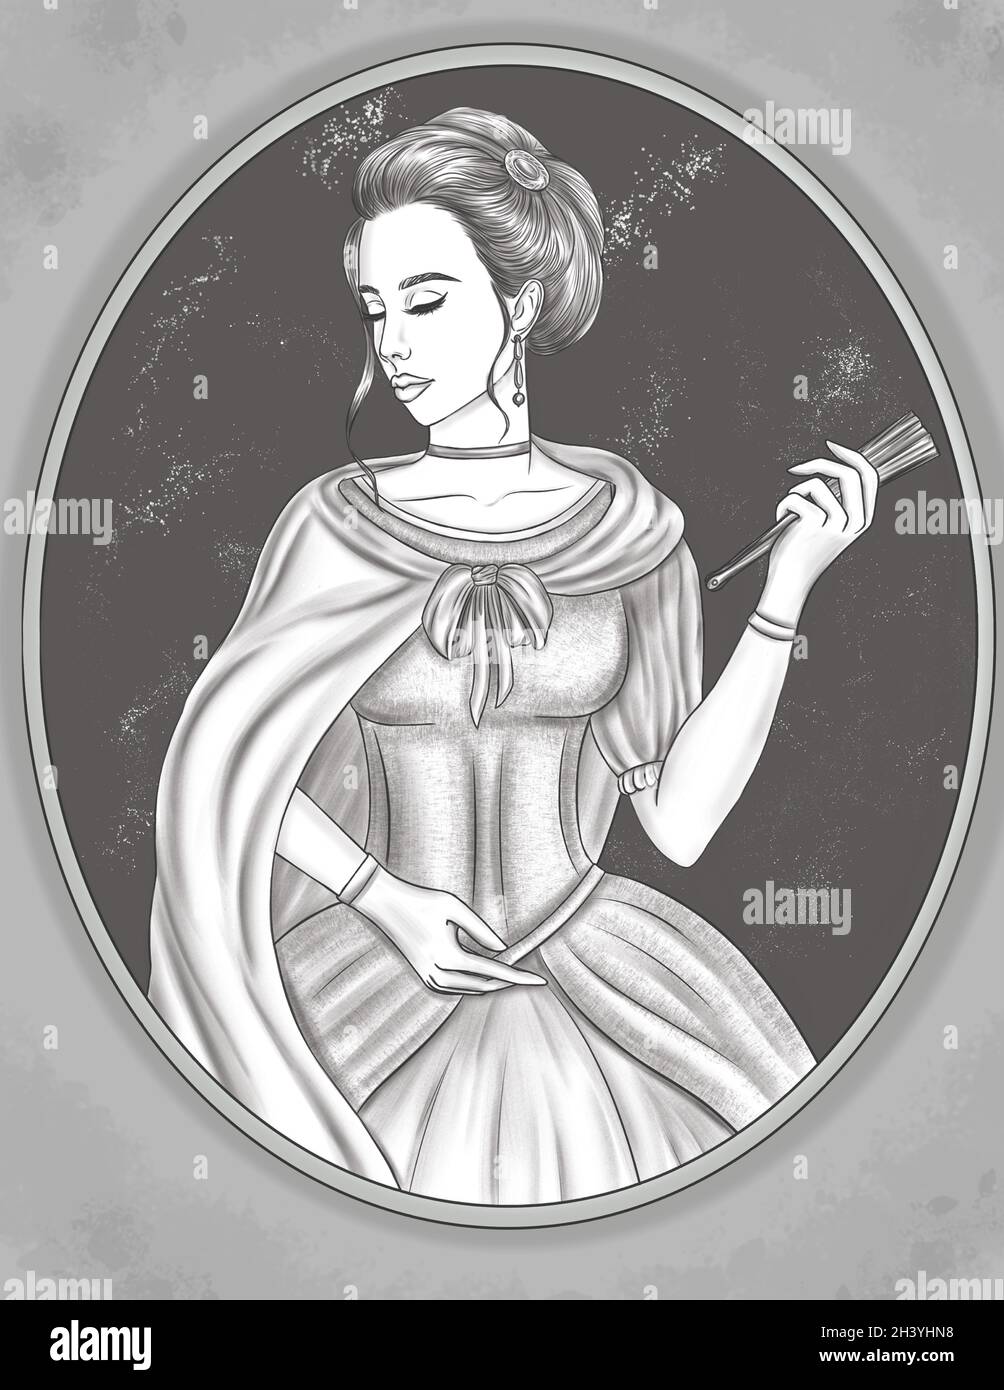 Beautiful Lady In Dress Closed Eyes Holding Fan Colorless Line Drawing. Woman In Gown Standing In Circular Frame Side Facing Col Stock Photo